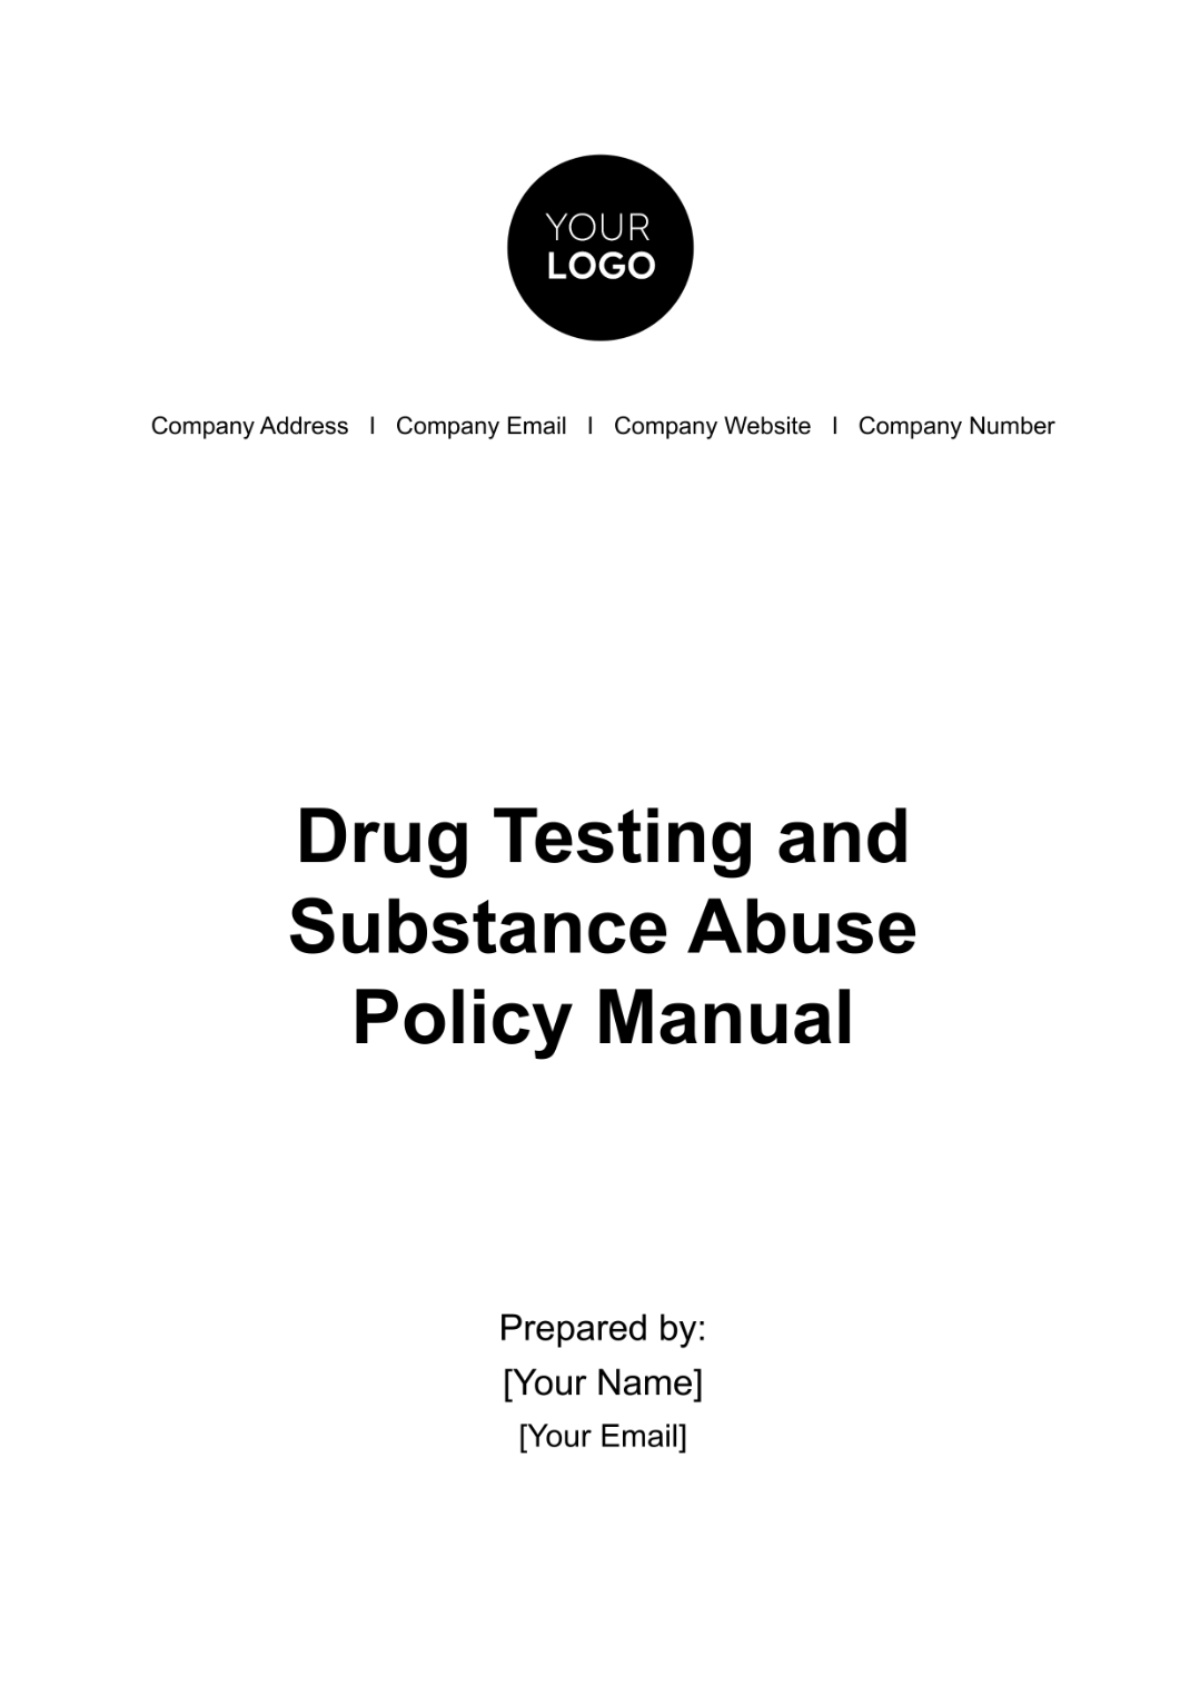 Drug Testing and Substance Abuse Policy Manual HR Template